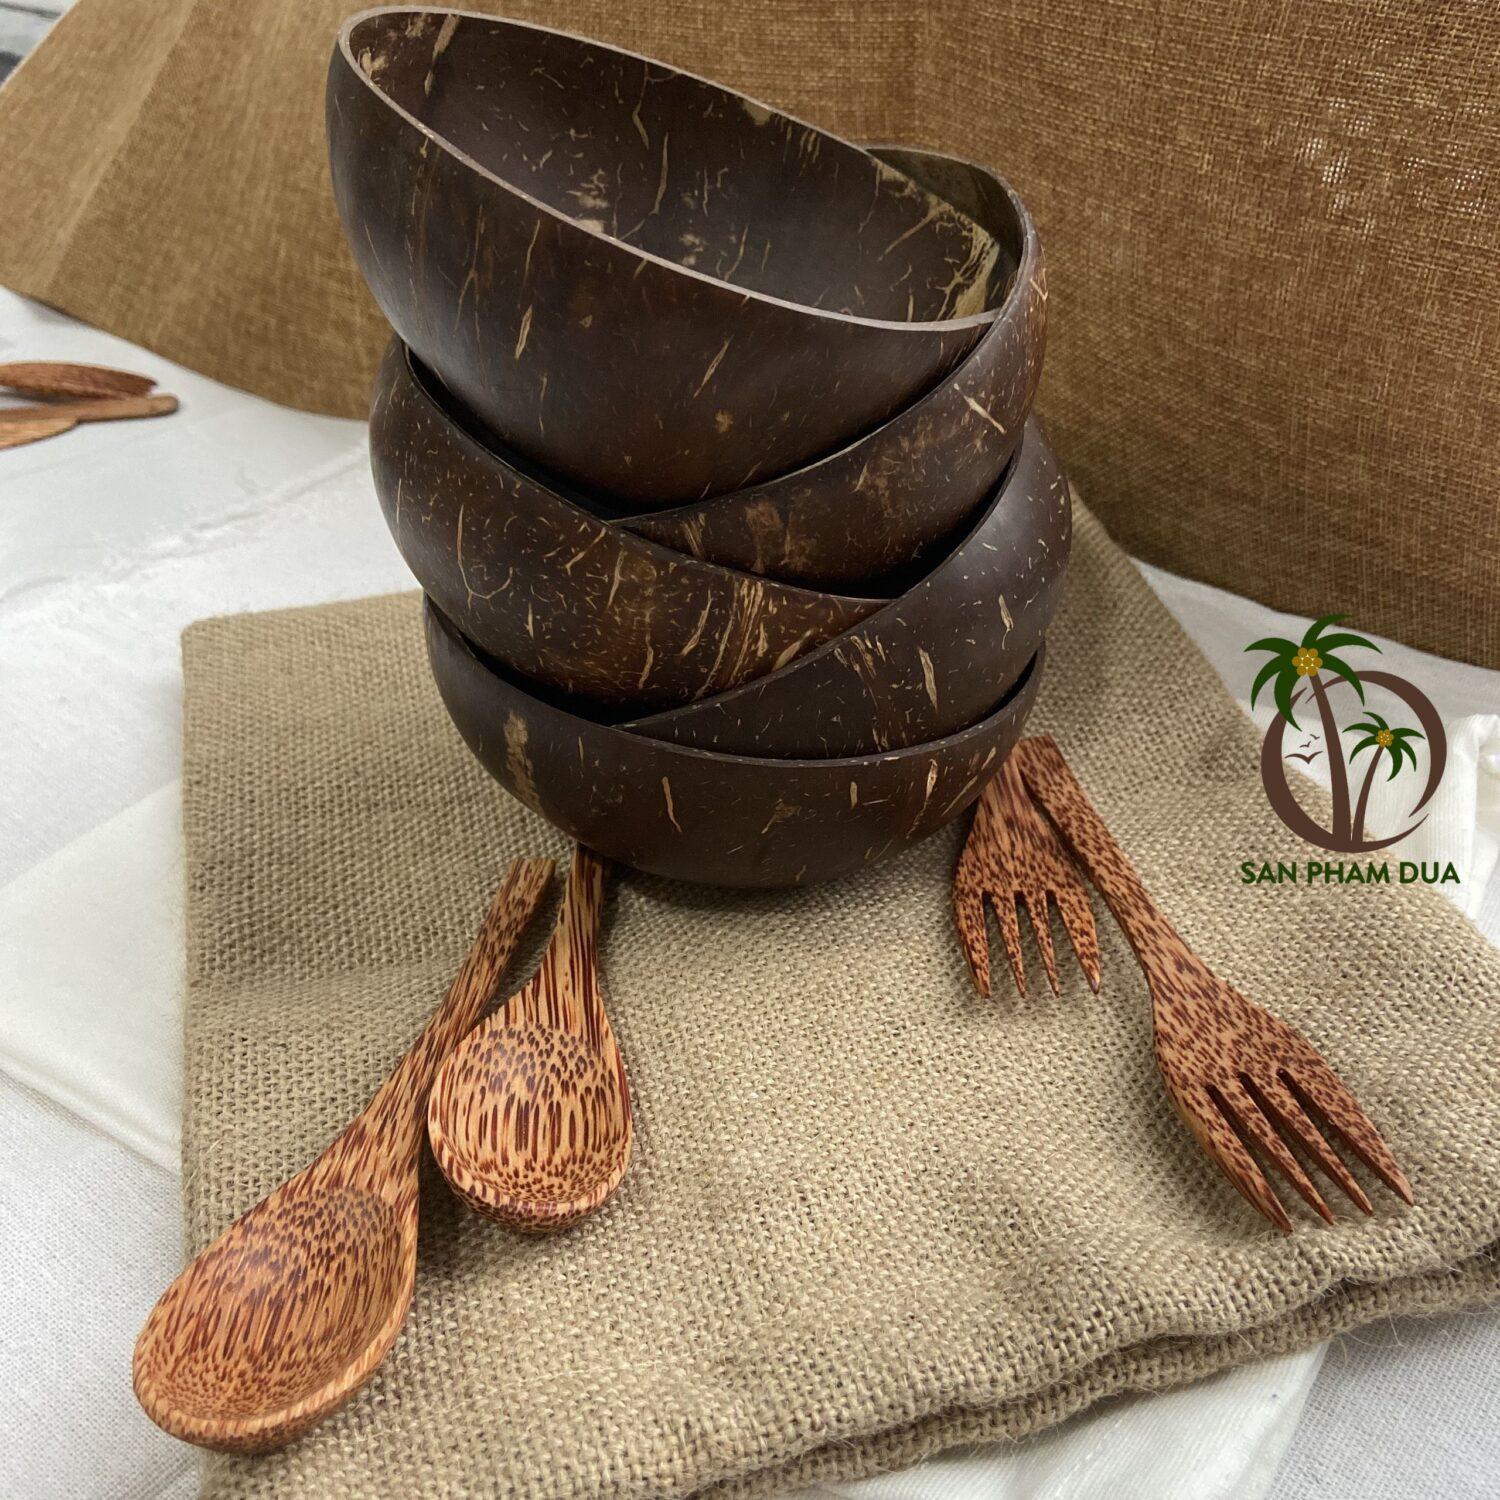 The benefits of using a coconut shell bowl